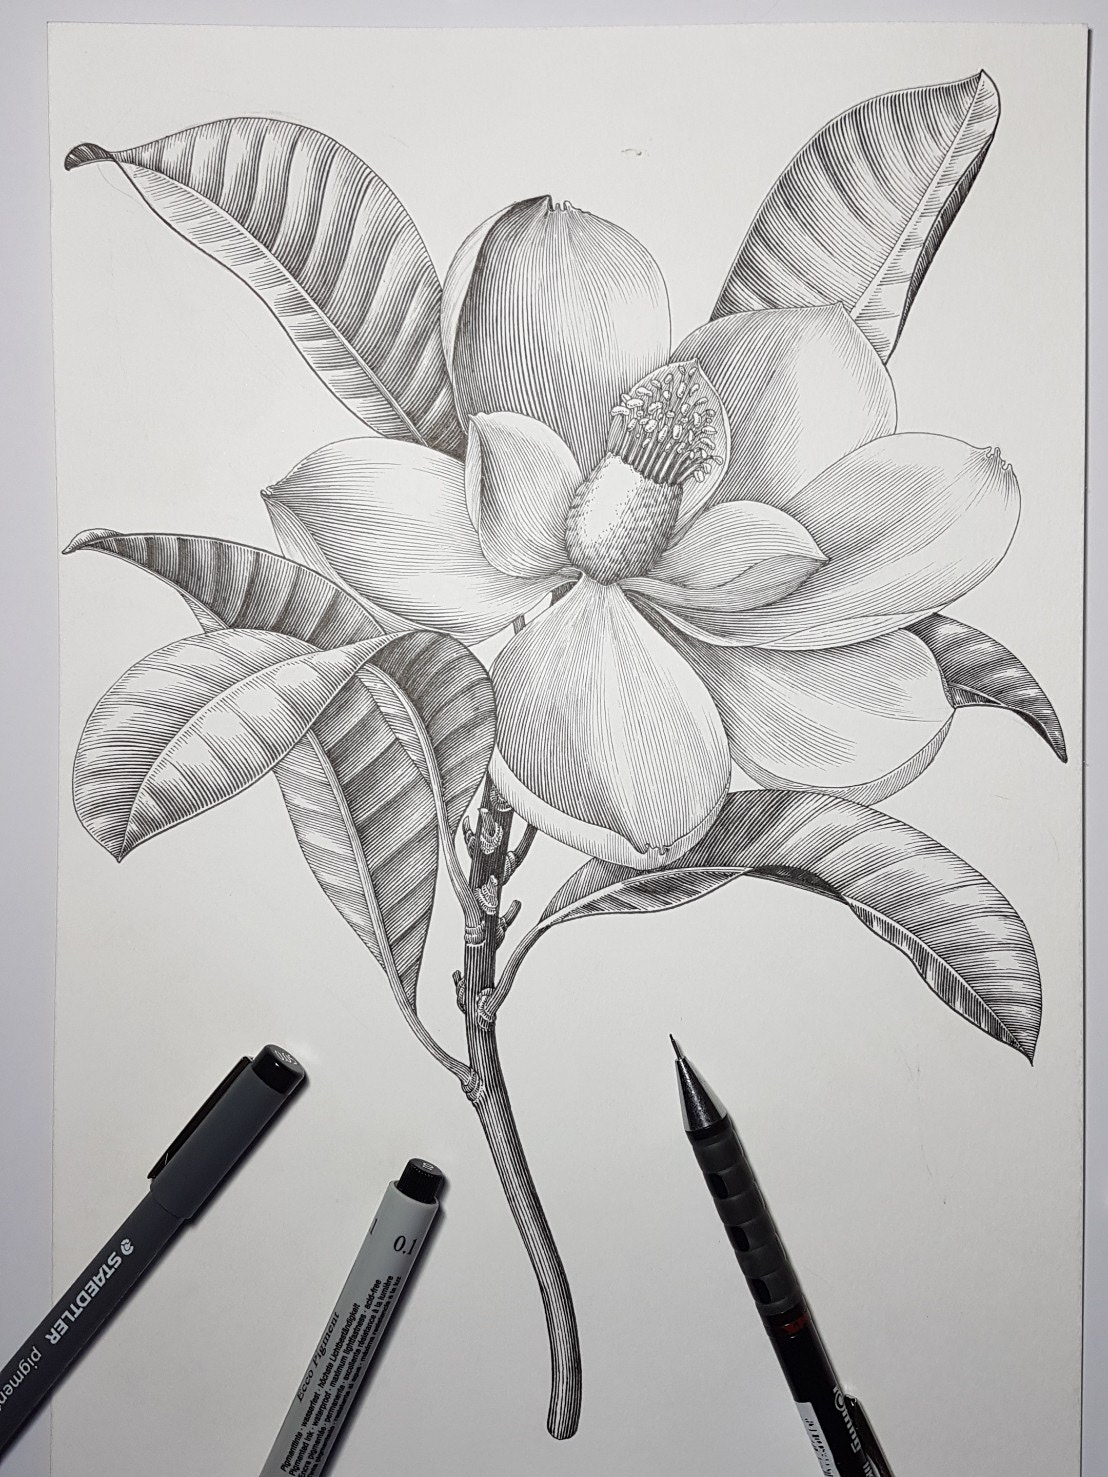 Magnolia flower drawing vintage style on Behance